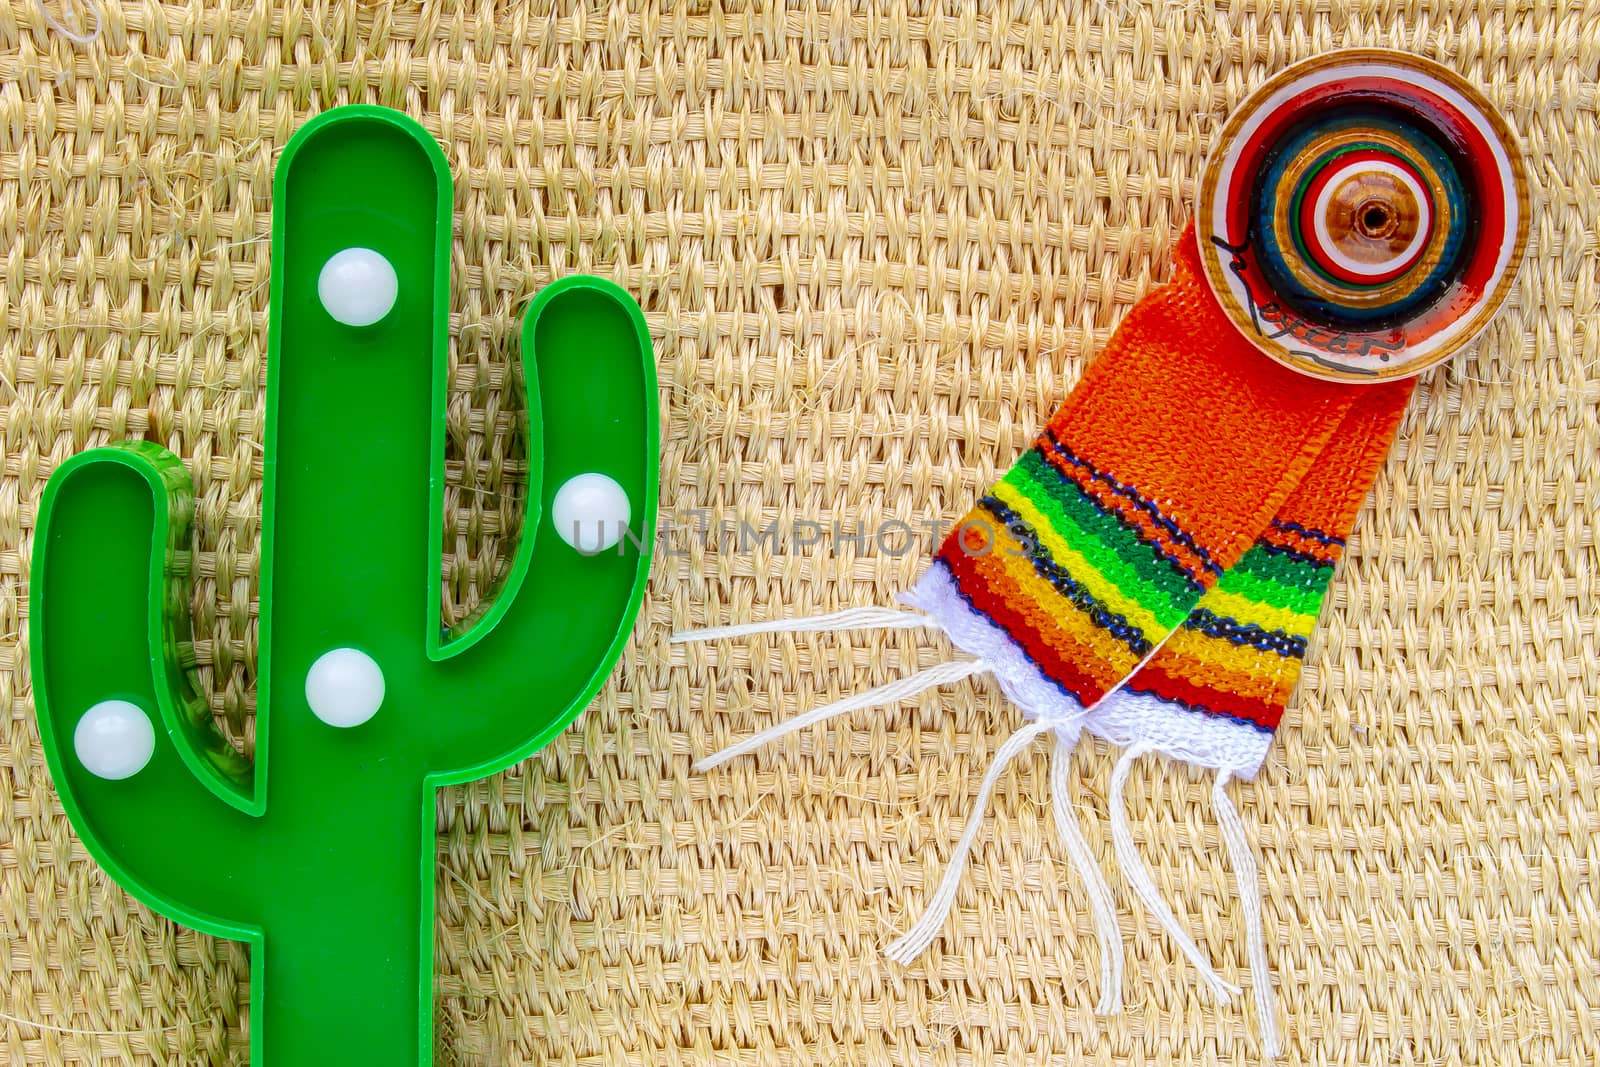 Cinco de Mayo background. A cactus and a sombrero and poncho on a straw rural bag background texture